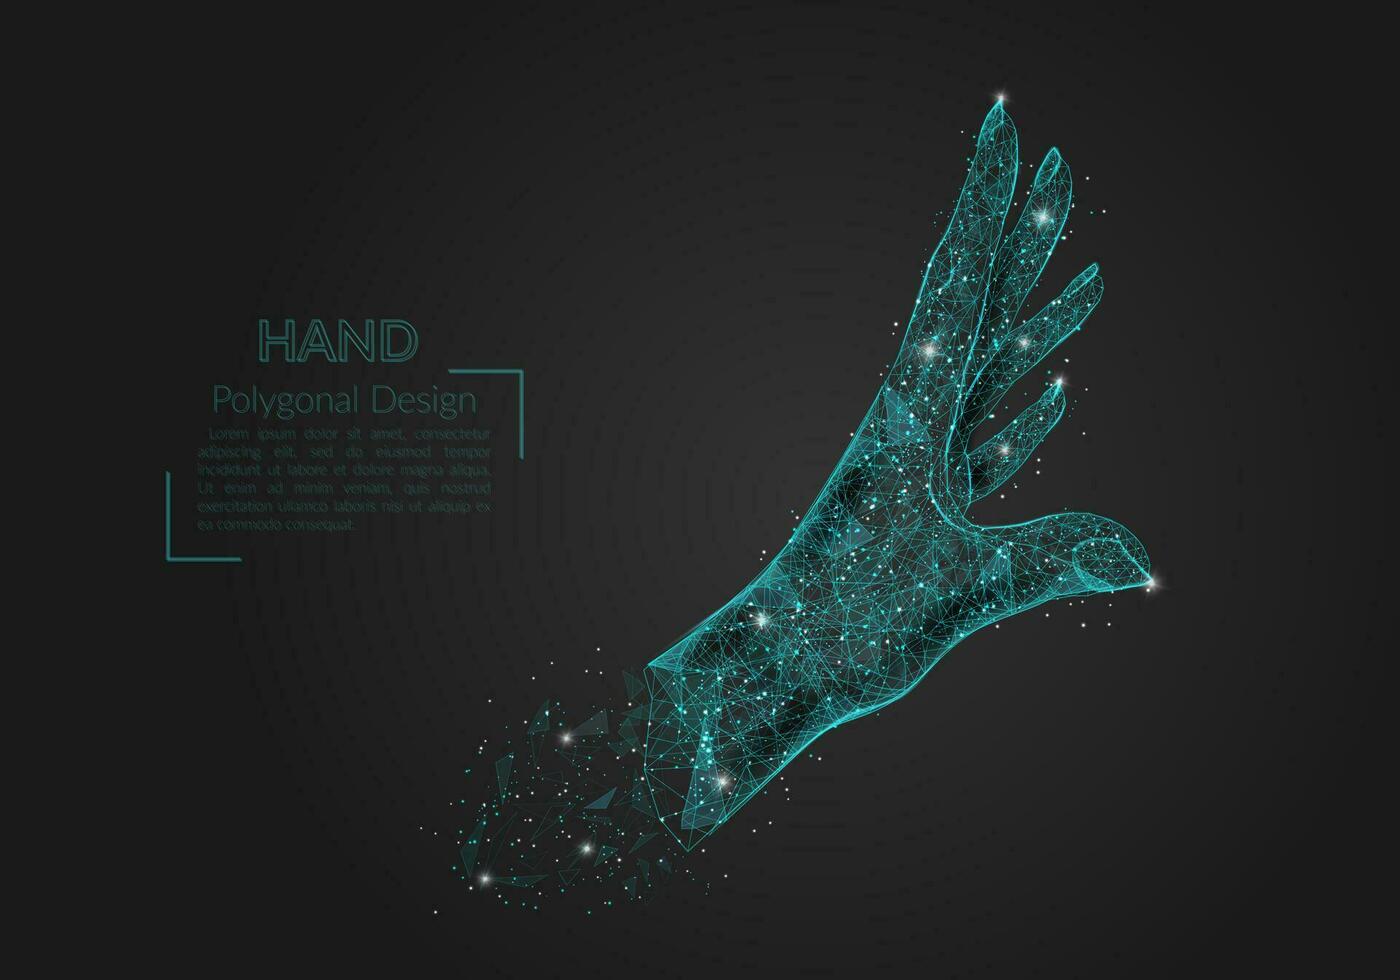 Abstract isolated image of human palm. Polygonal illustration looks like stars in the blask night sky in spase or flying glass shards. Digital design for website, web, internet vector